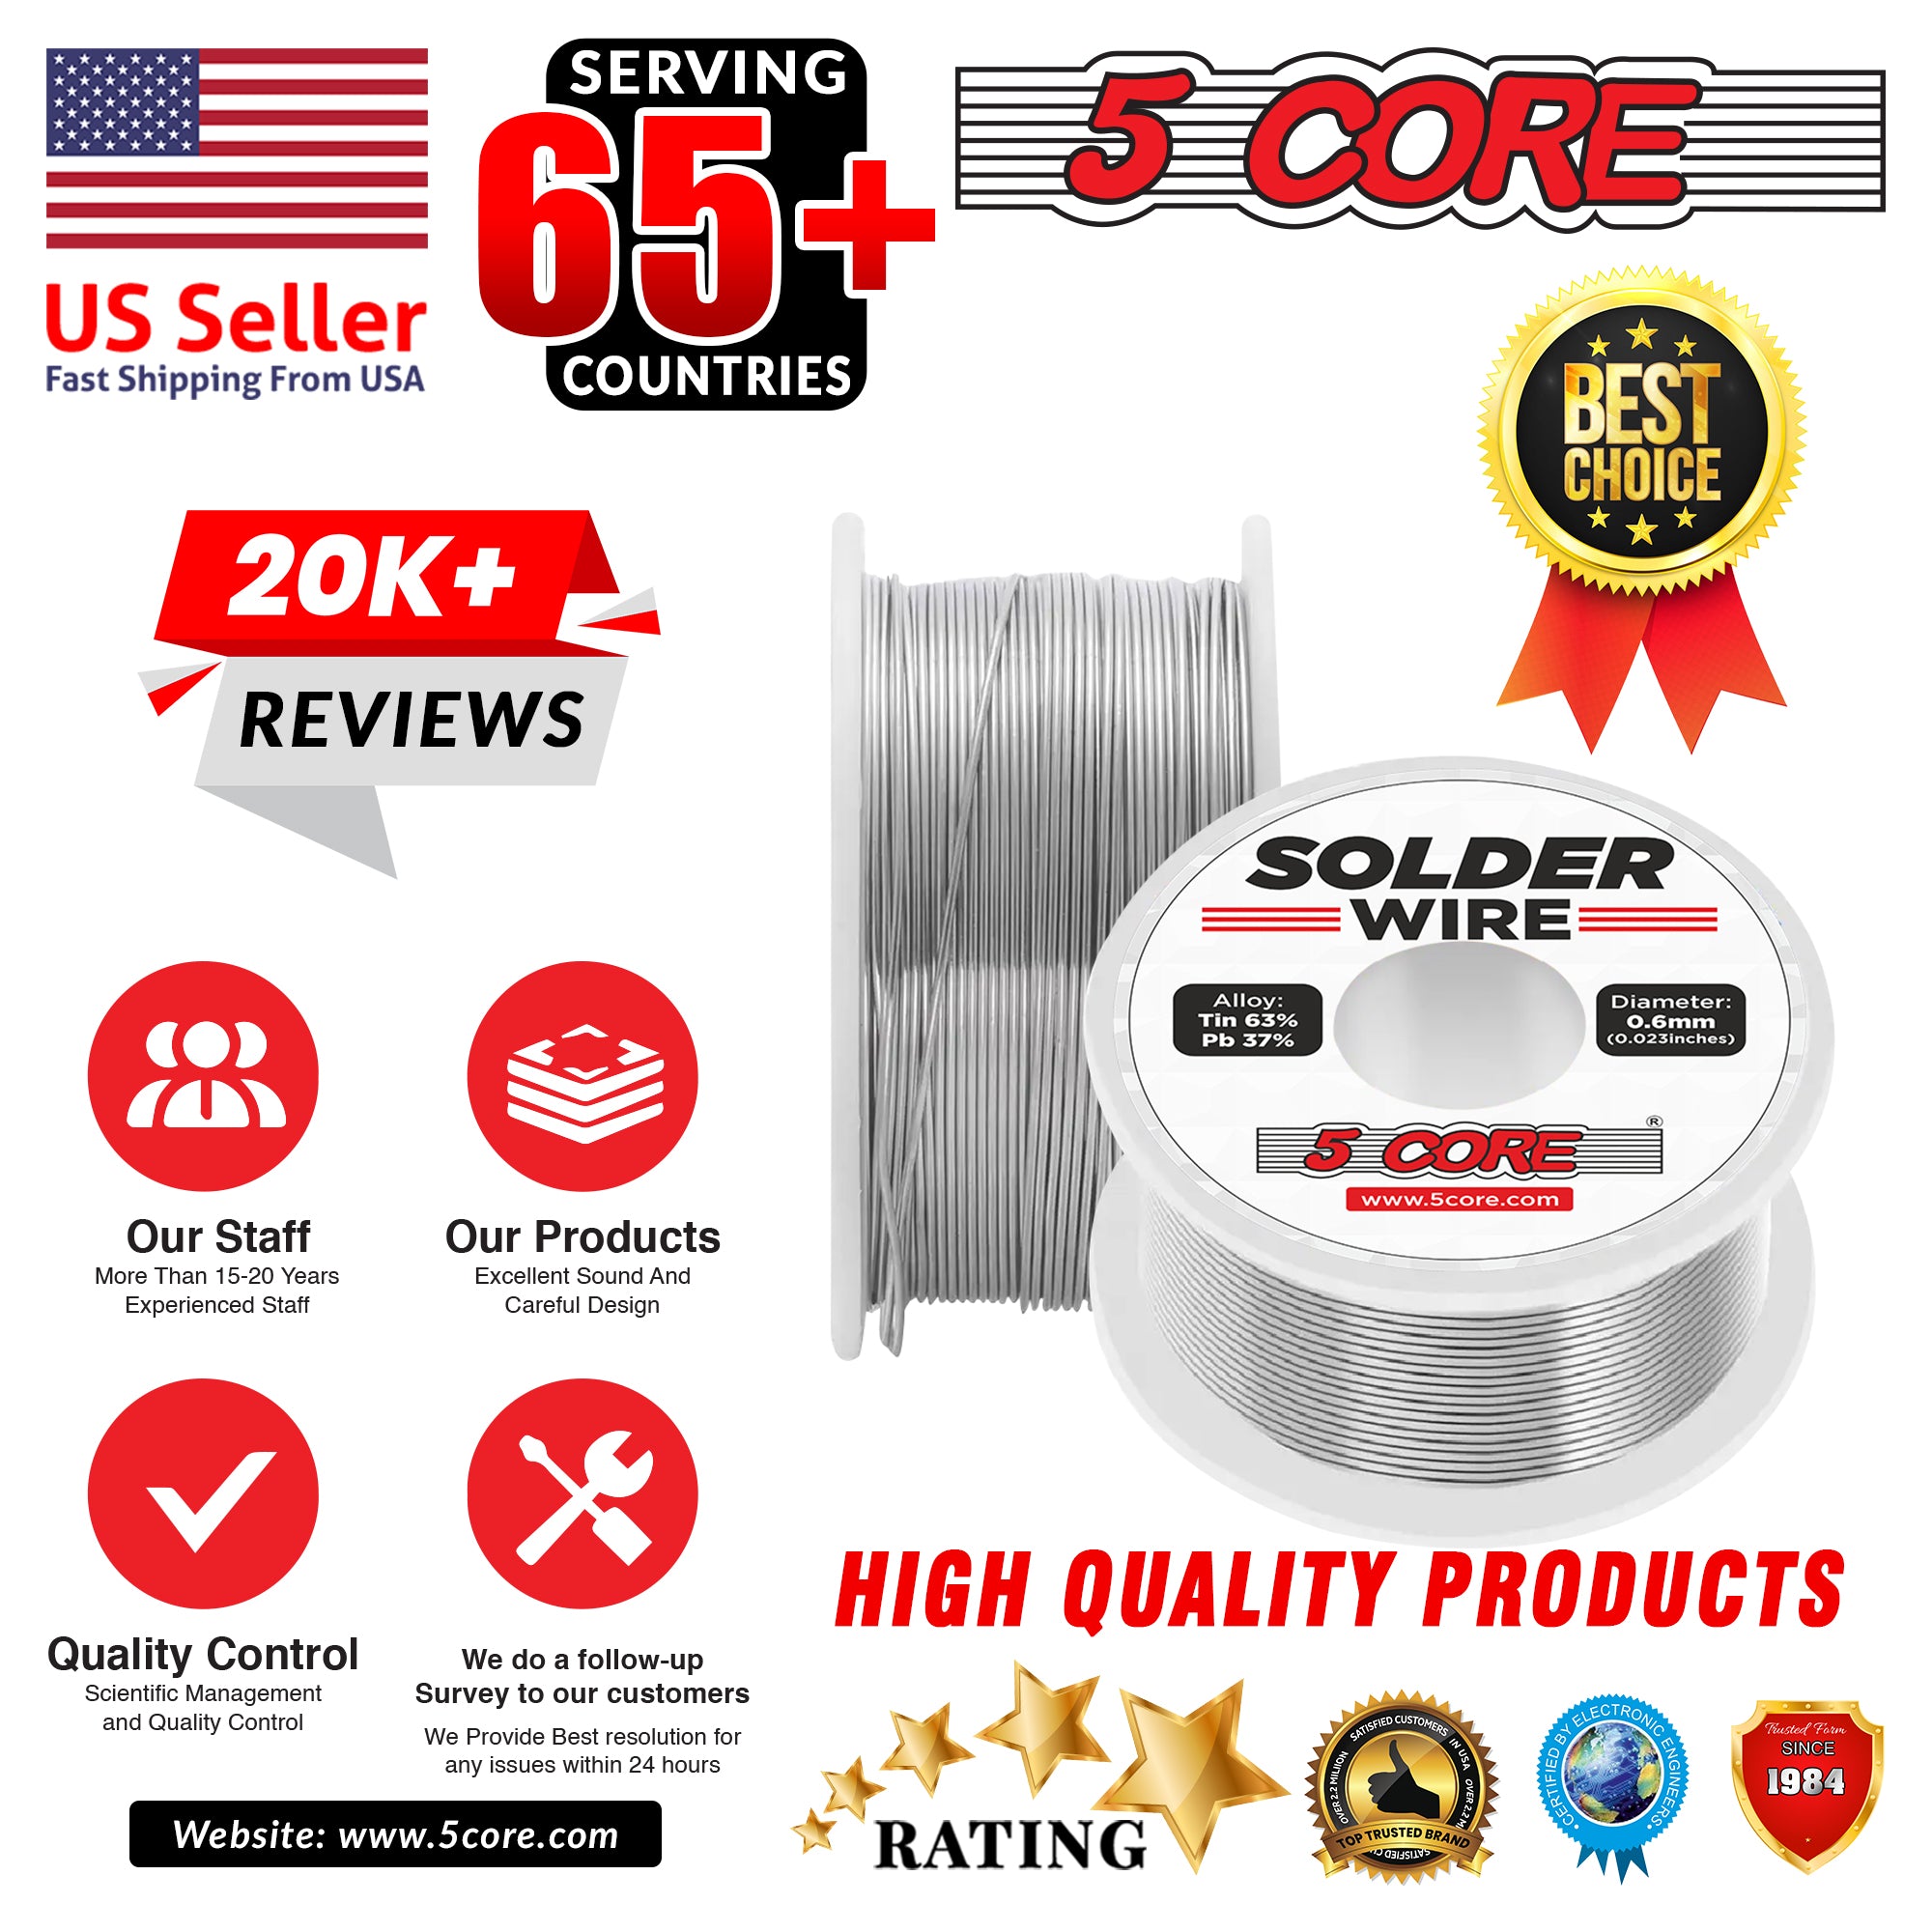 5Core Solder Wire 5 Pack  DIY Tin Lead for Soldering Components- solder wire 5 pcs